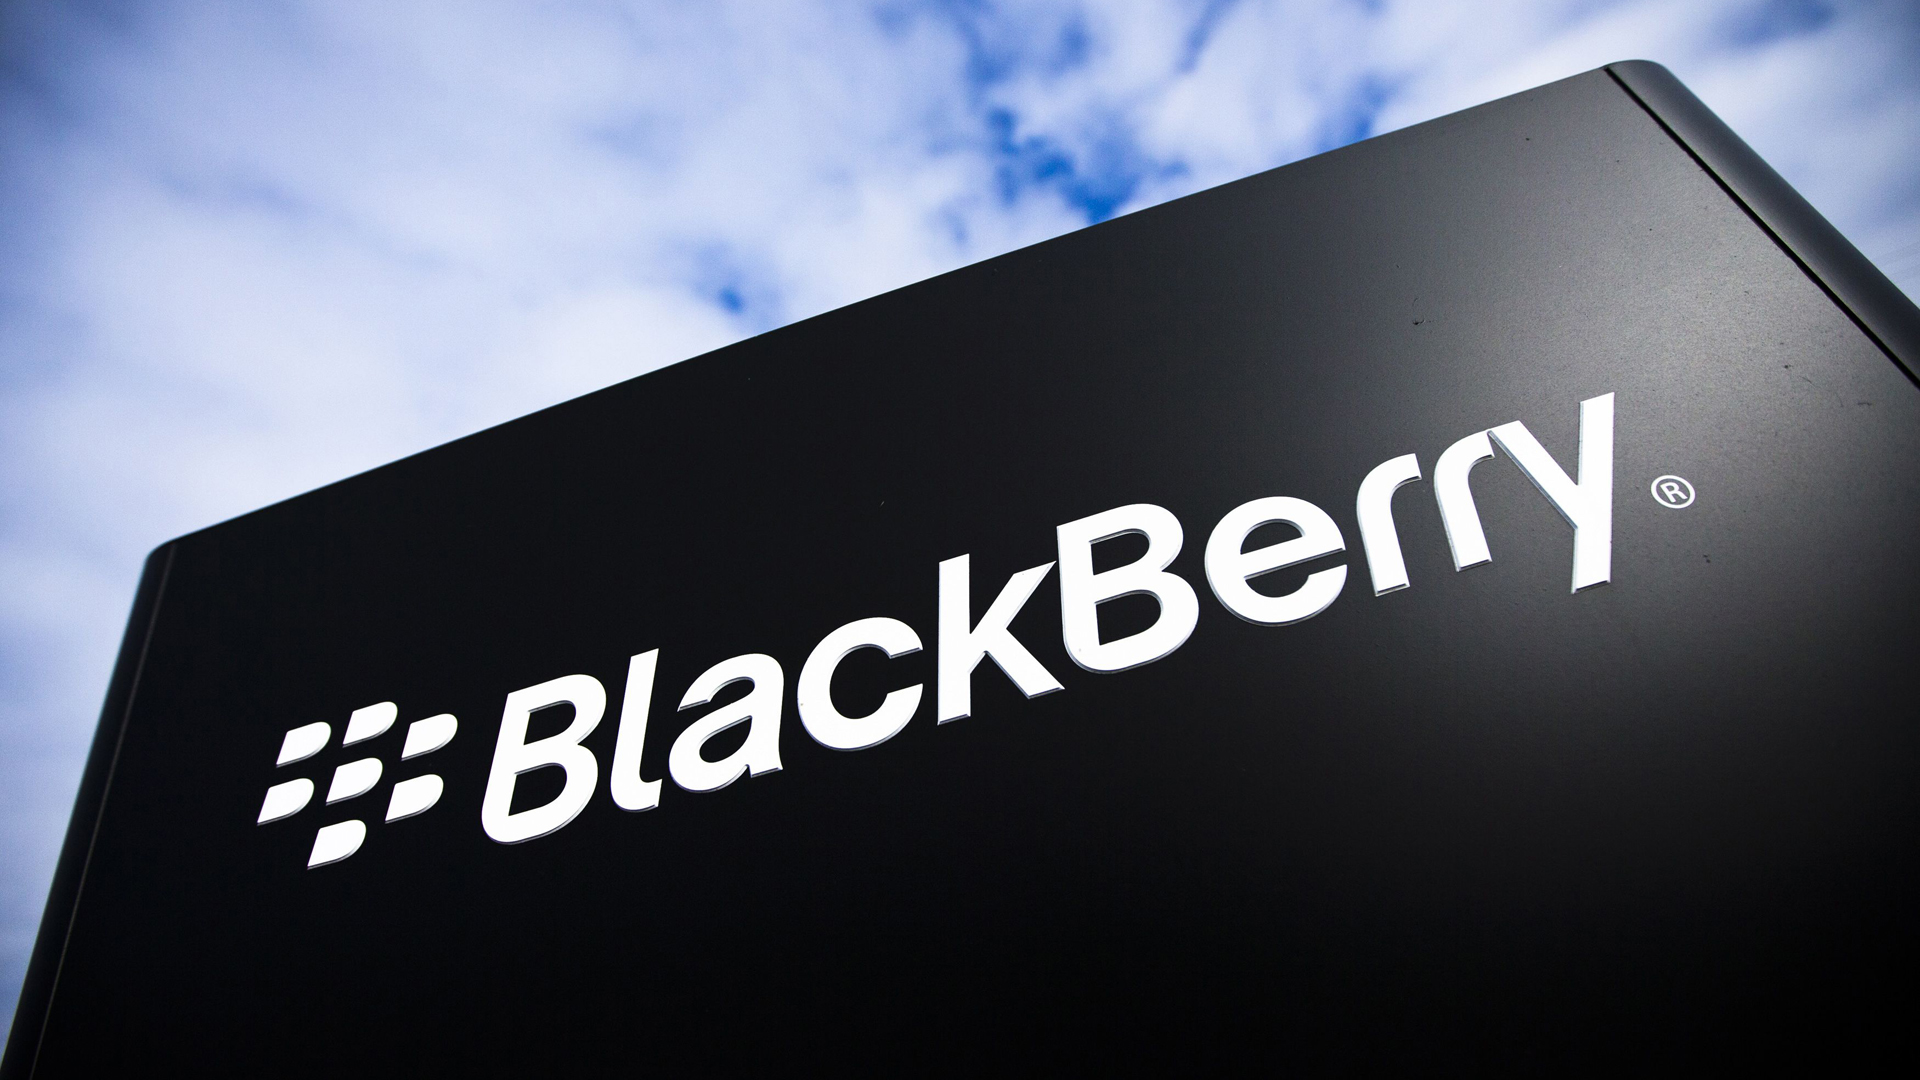 Image: The BlackBerry logo is pictured at the BlackBerry campus in Waterloo